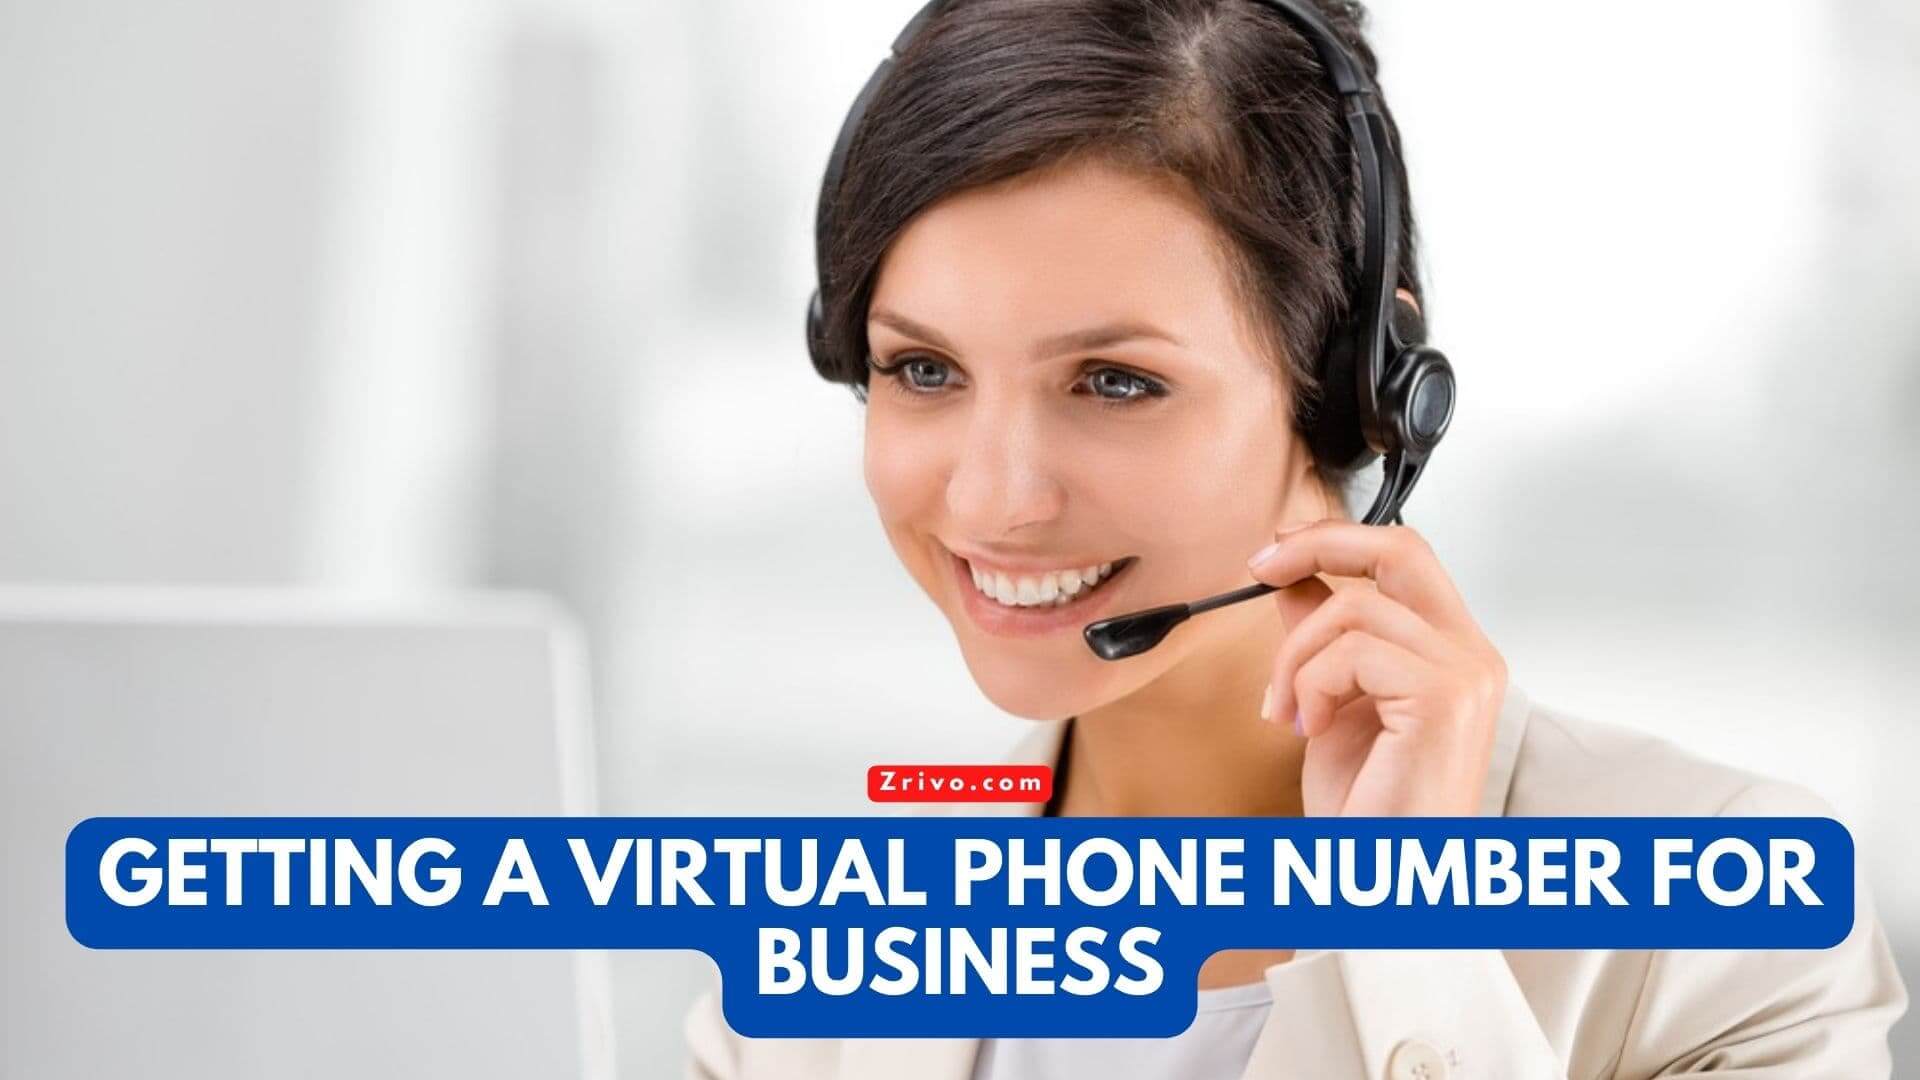 Getting a Virtual Phone Number For Business